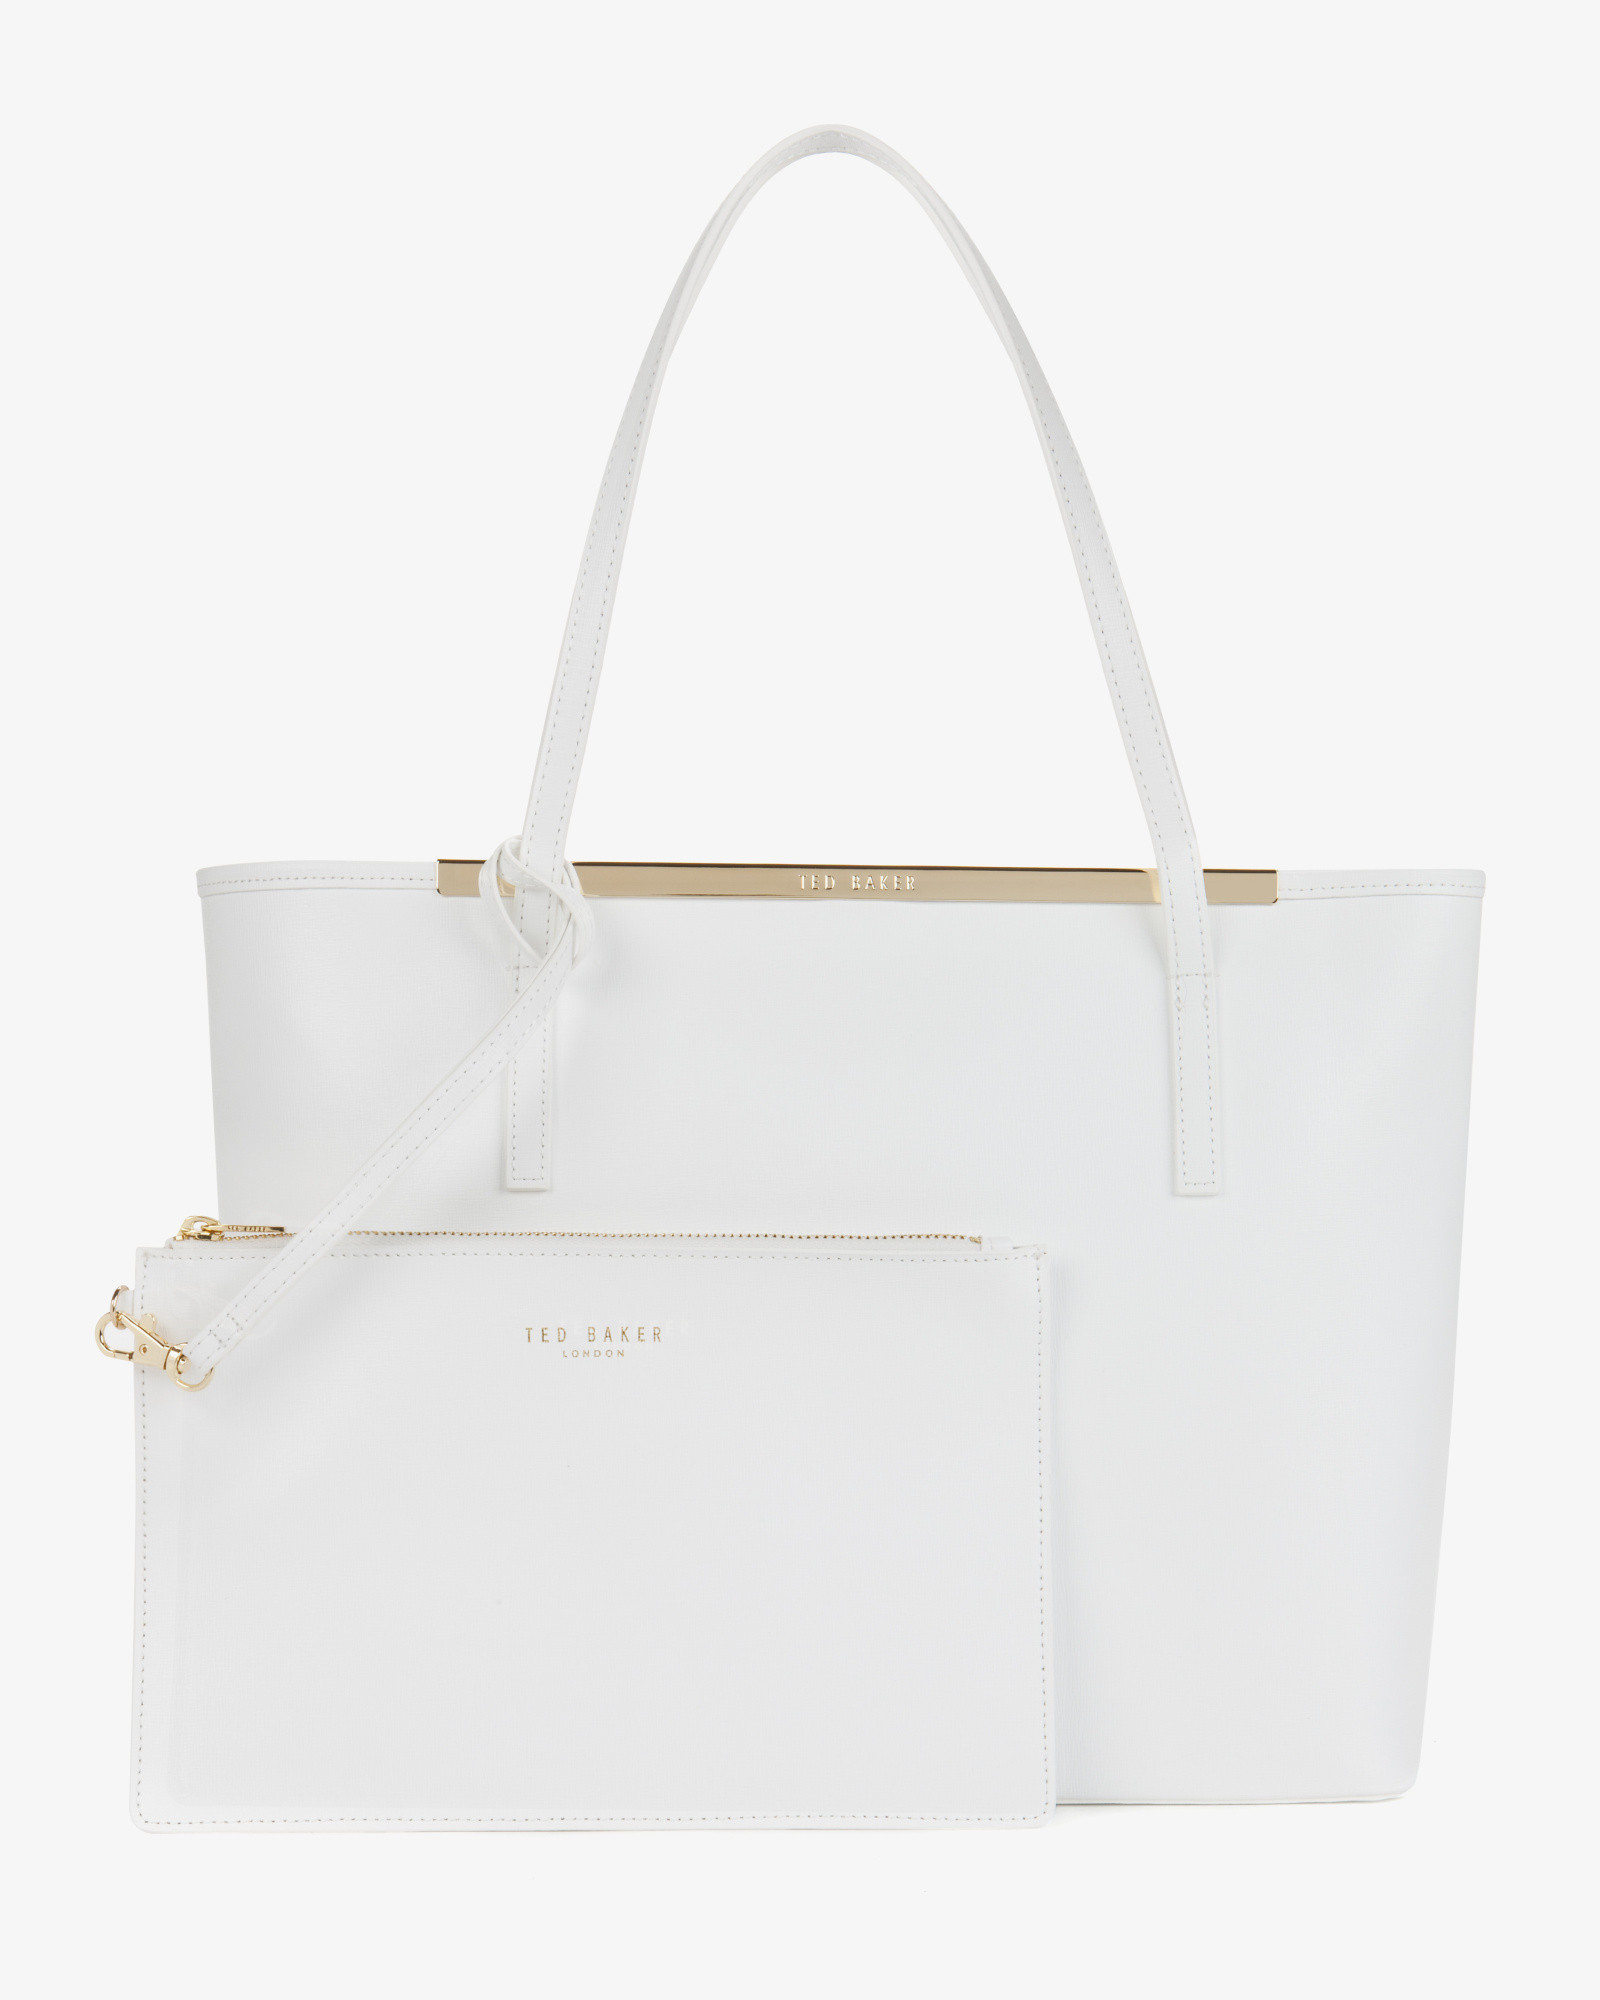 Ted baker Crosshatch Leather Shopper Bag in White | Lyst